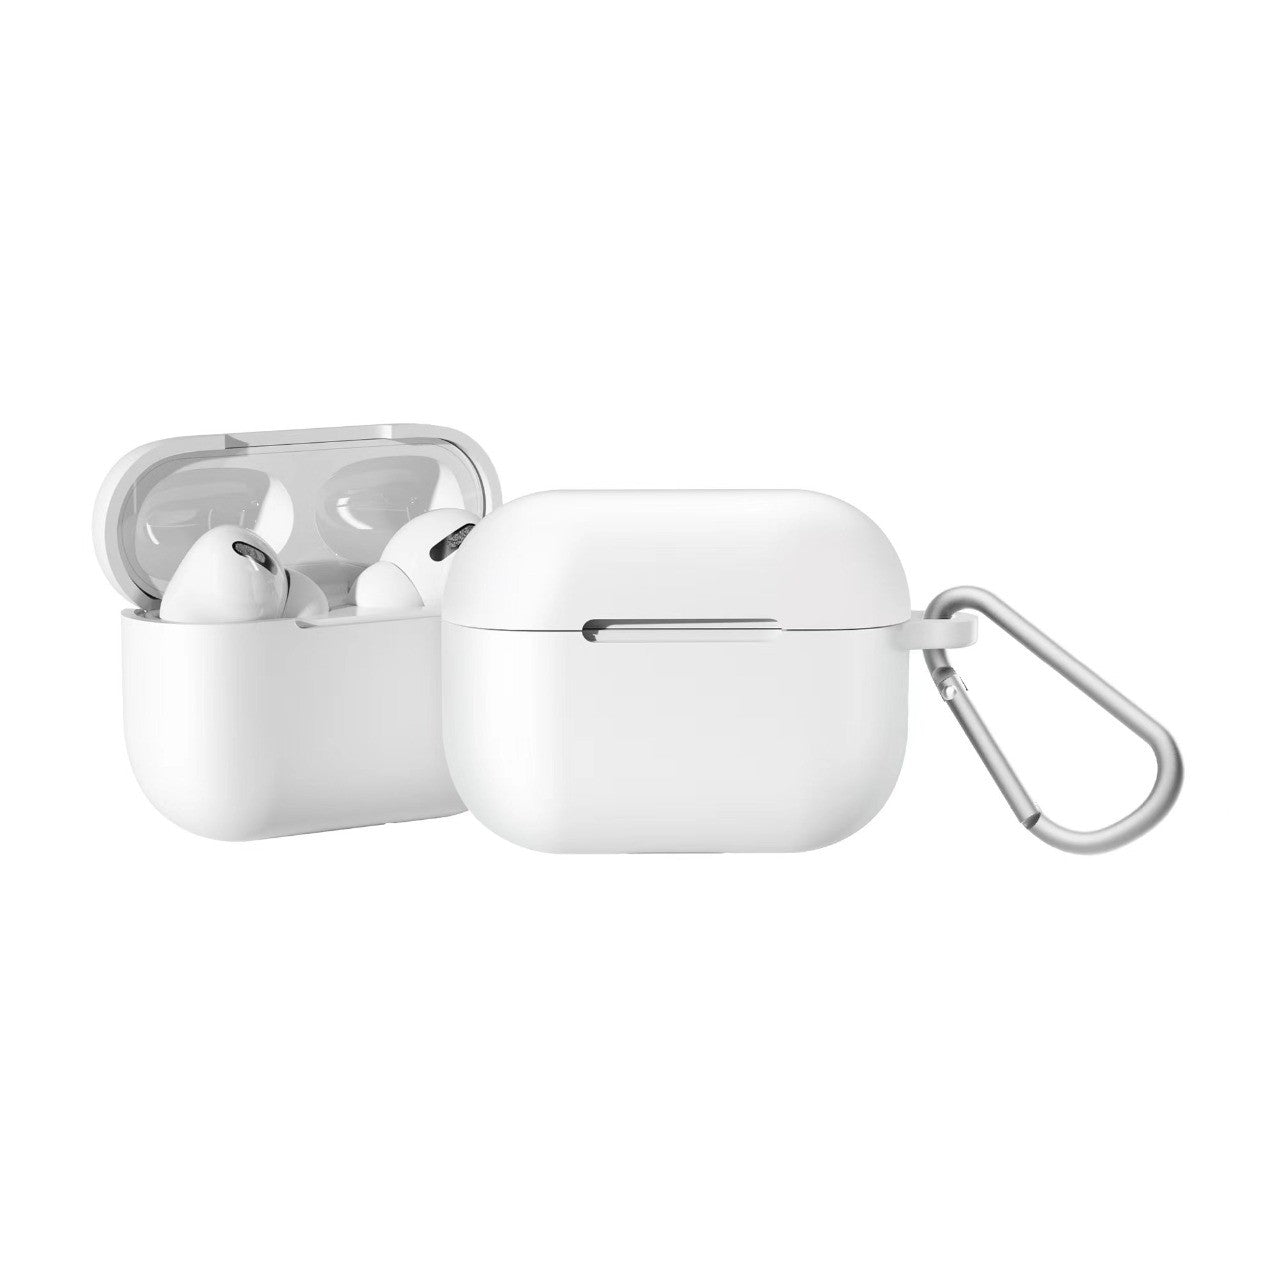 Apple Airpods 2 Case